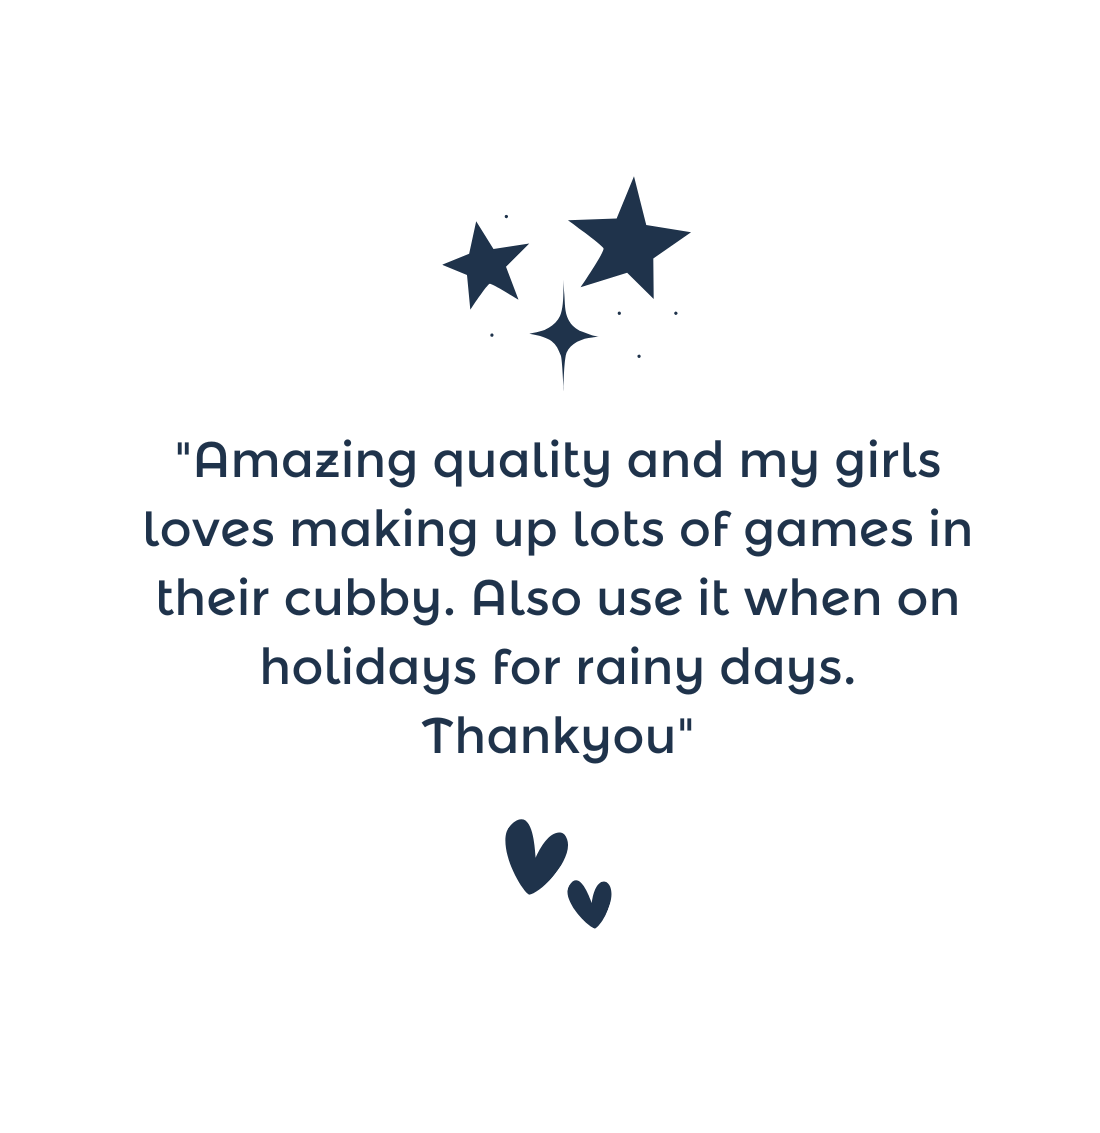 "Amazing quality and my girls loves making up lots of games in their cubby. Also use it when on holidays for rainy days. Thankyou"